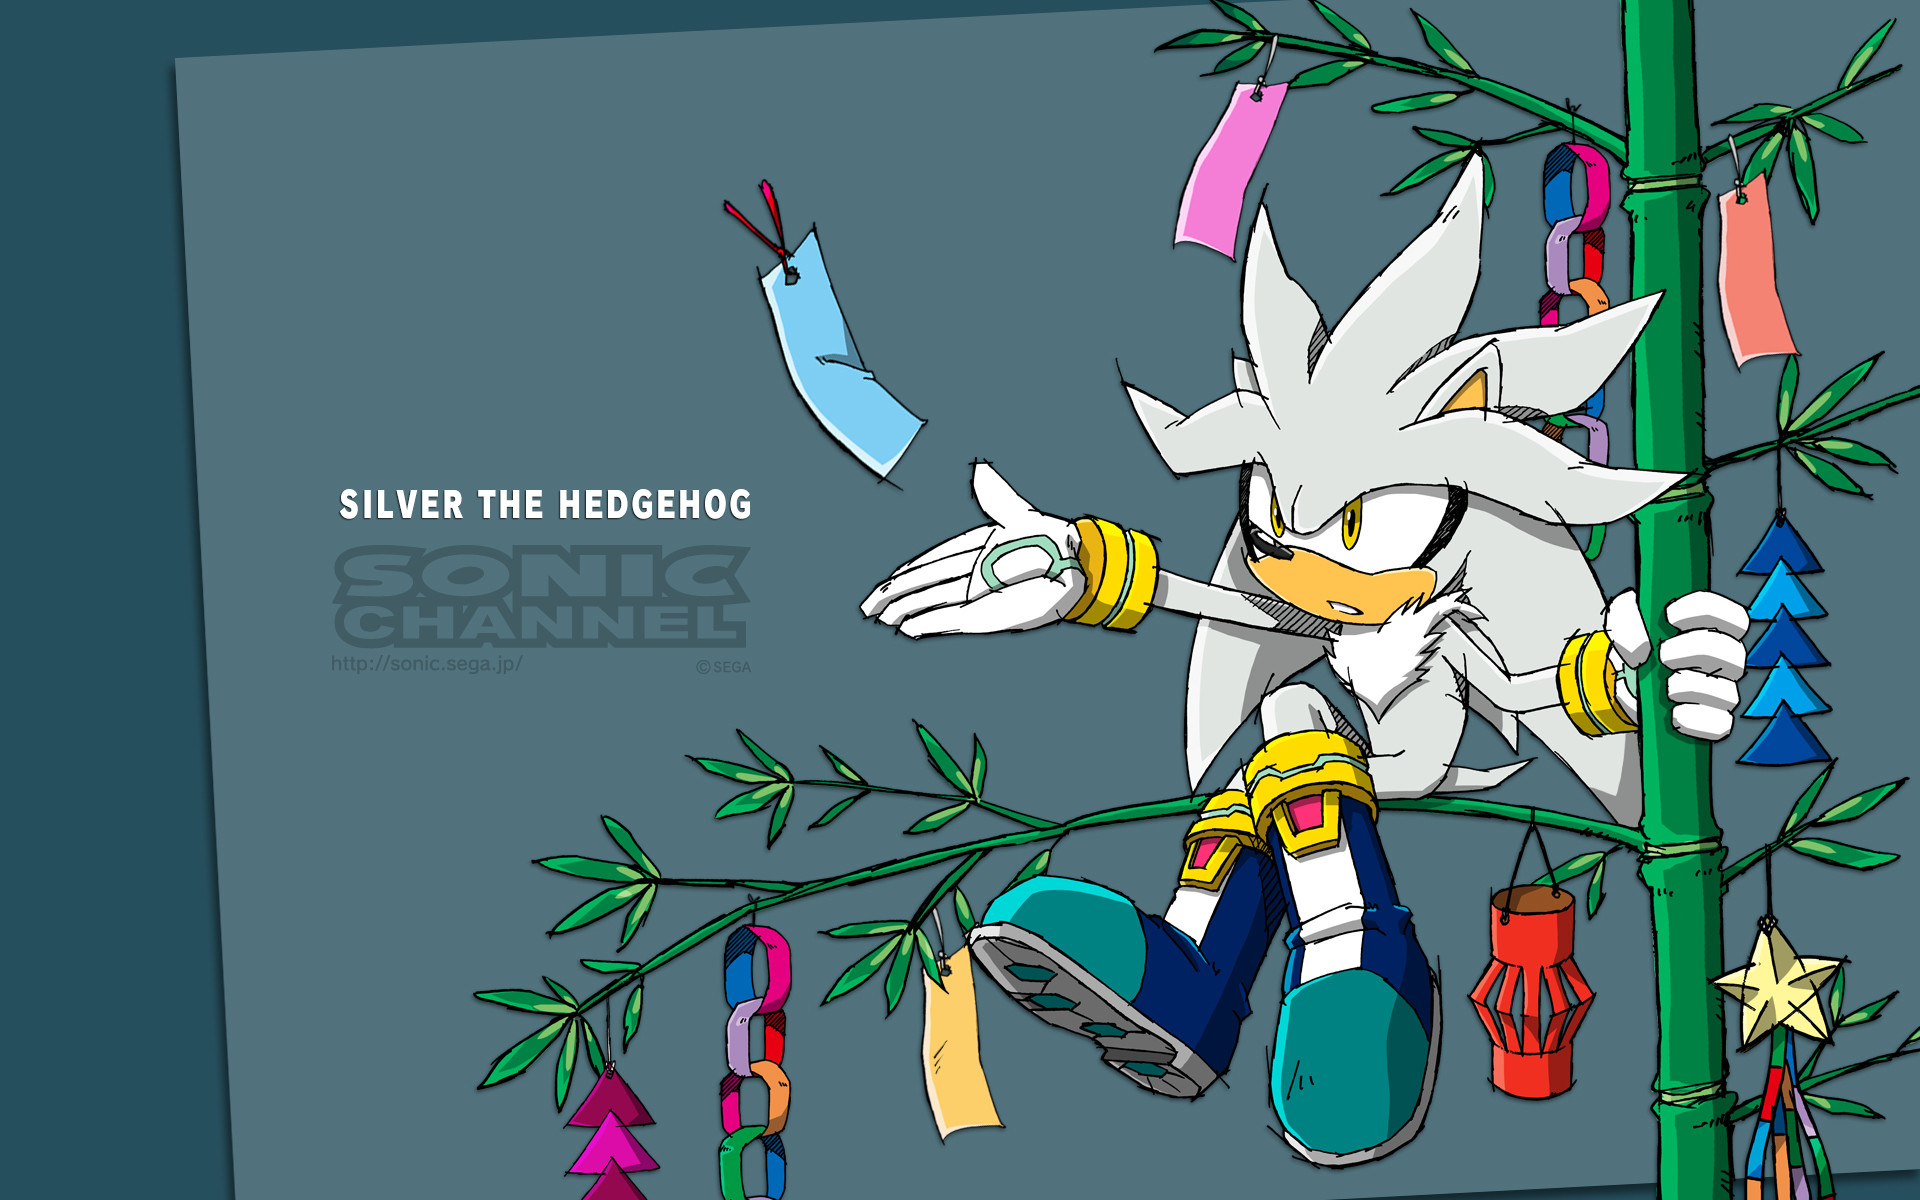 Video Game – Sonic the Hedgehog Silver the Hedgehog Wallpaper